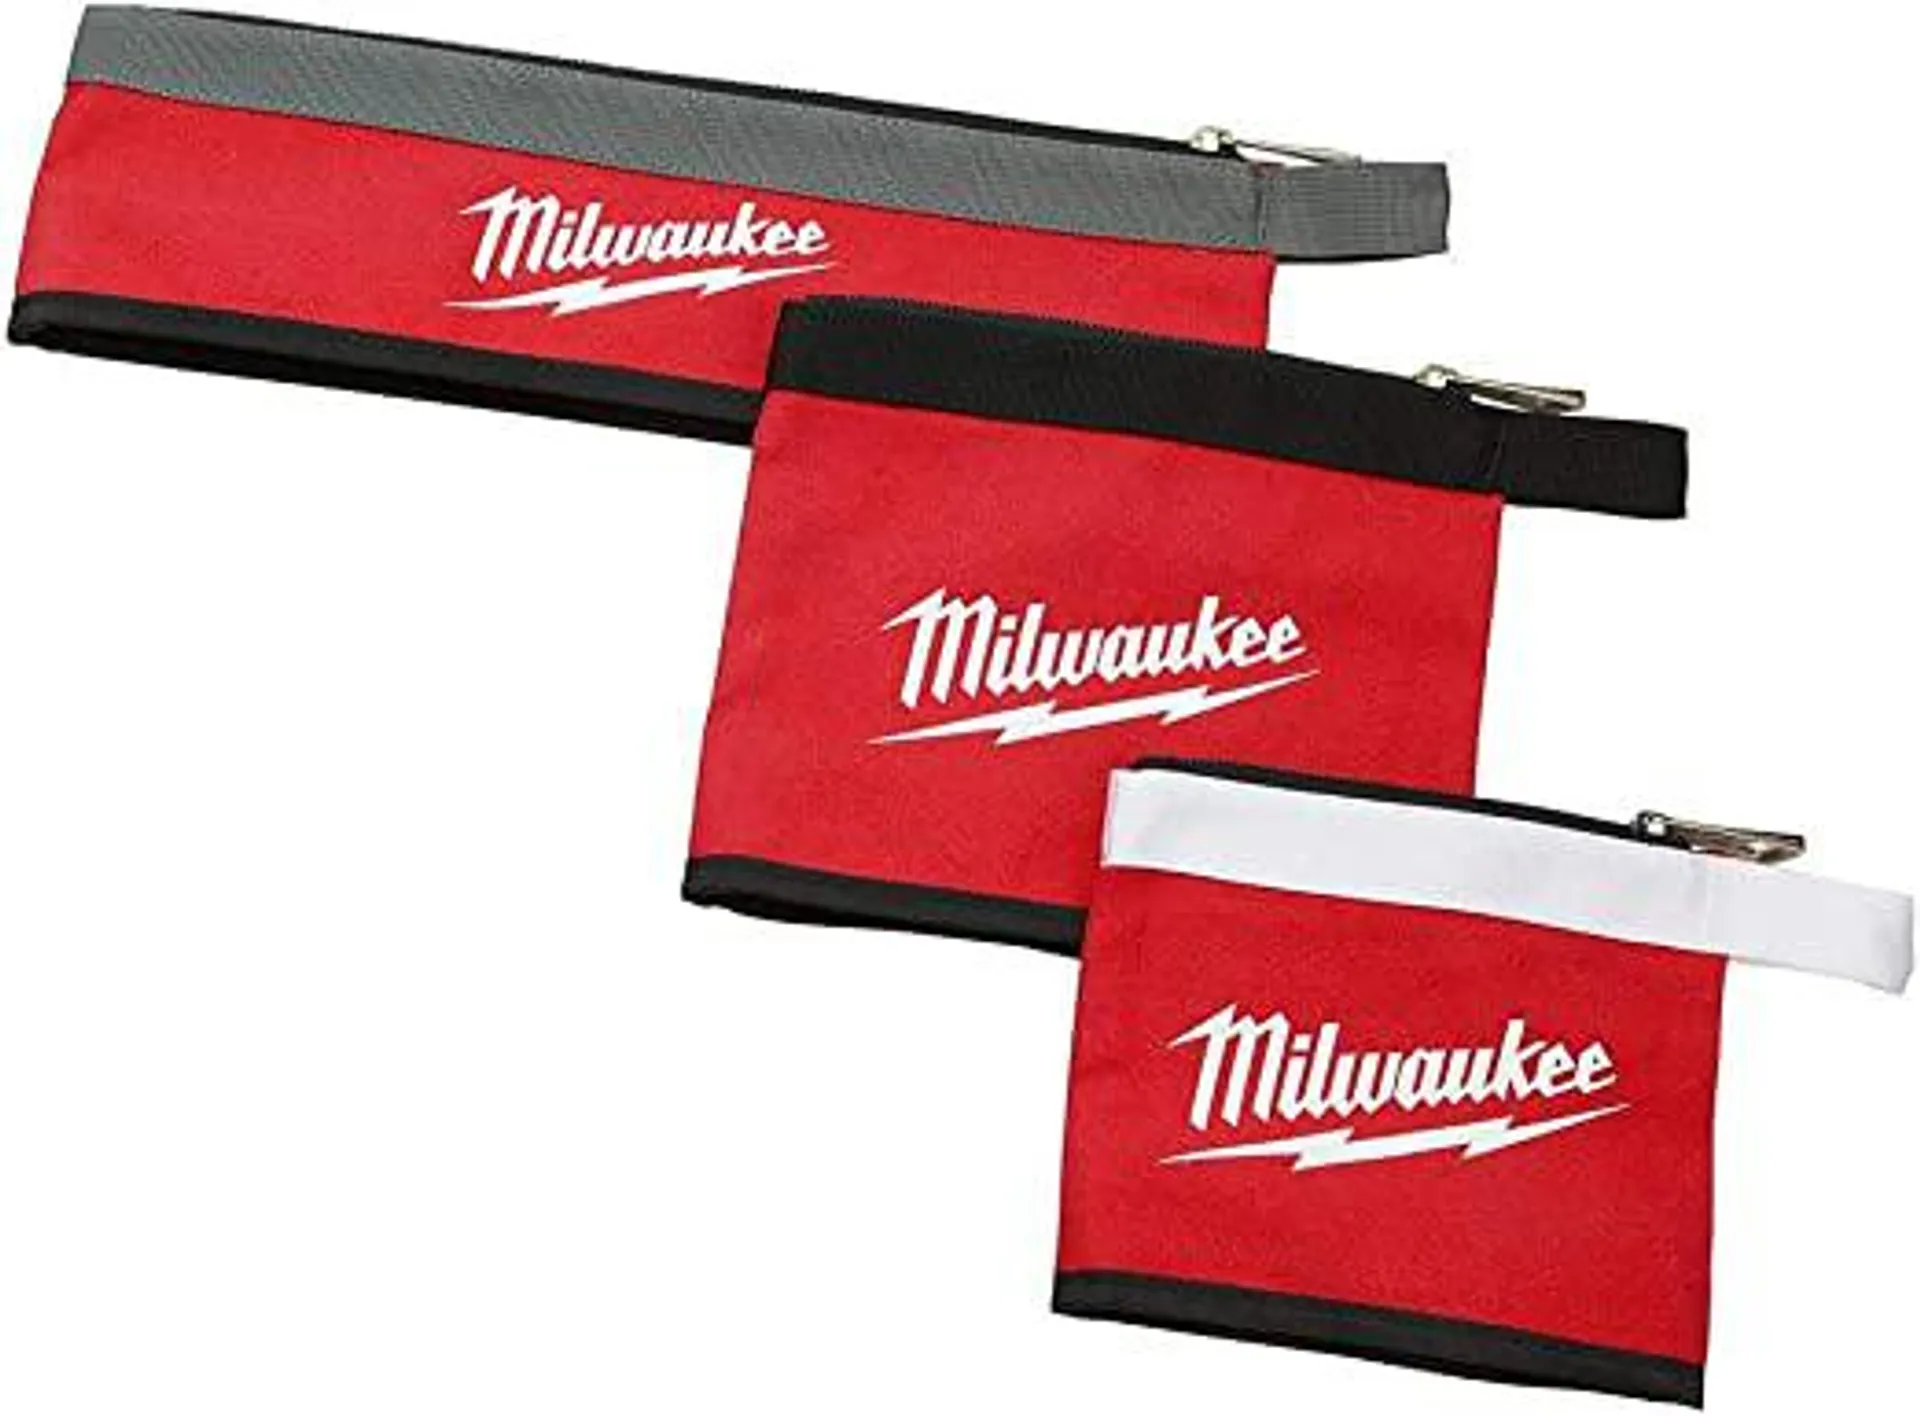 Milwaukee Multi-Size (14 in, 8 in, 6 in) Zipper Tool Bags in Red (3-Pack)